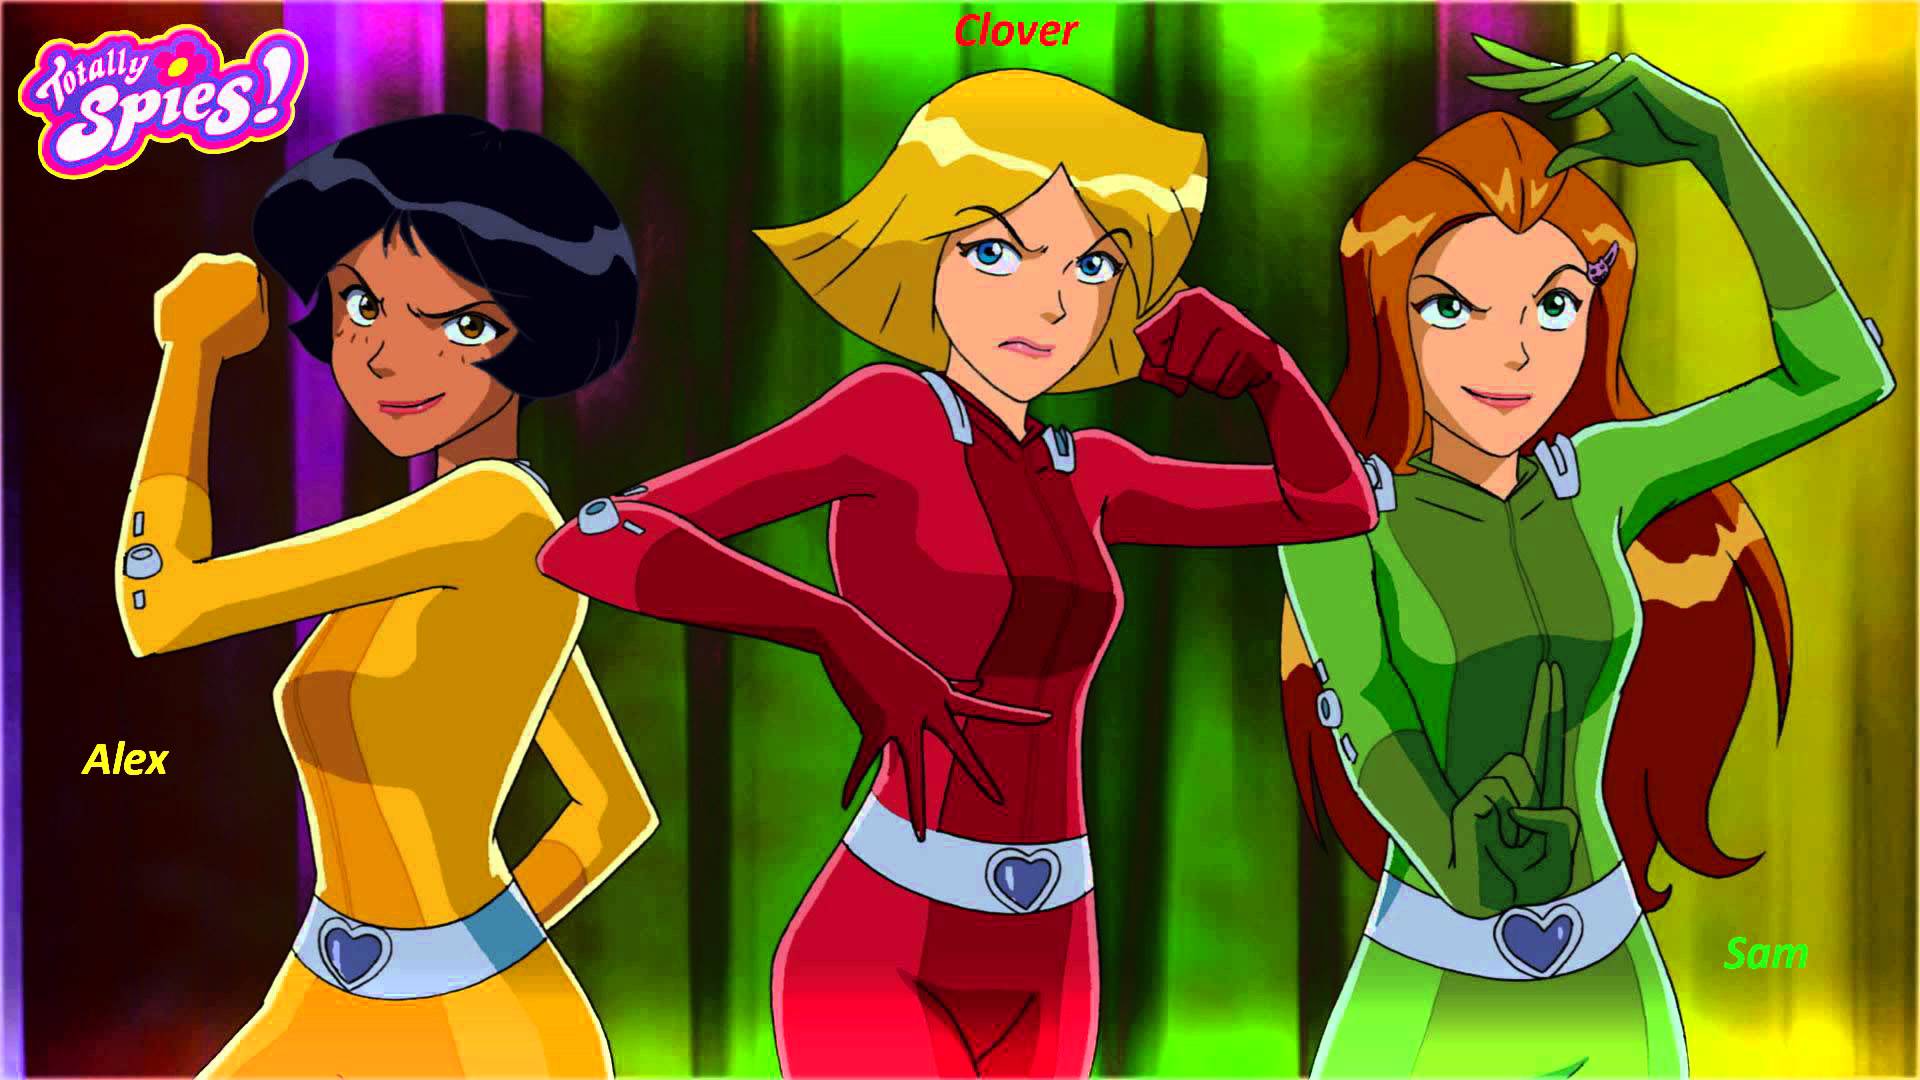 Totally Spies Raving Mad (Triple Star Rave Mix)